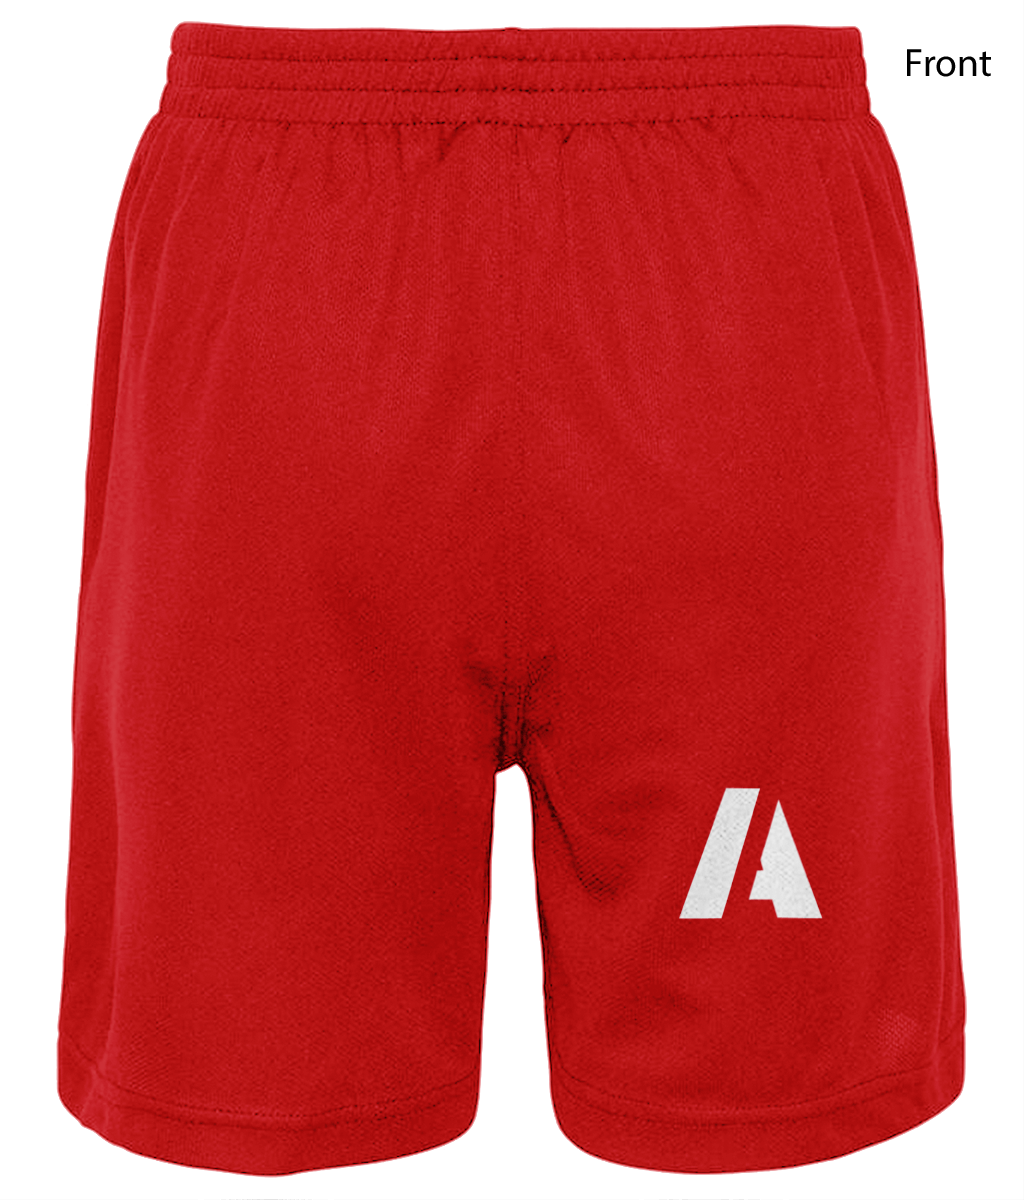 ACTIVELY, Just Cool Sports Shorts.